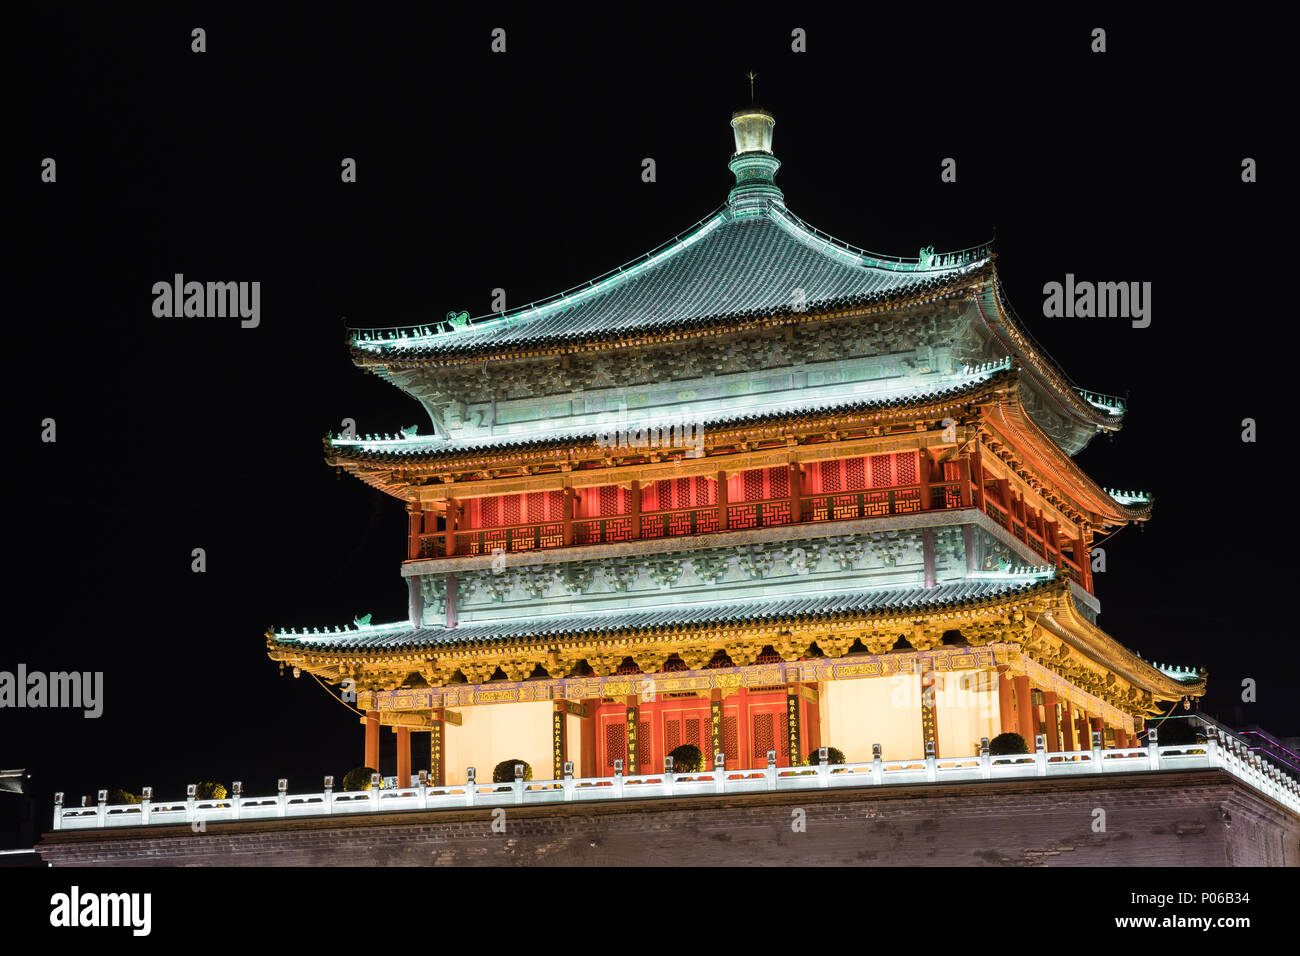 Famous Bell Tower in the Xi'an city, China. Xi'an is capital of Shaanxi Province and one of the oldest cities in China. Xi'an is the starting point of Stock Photo